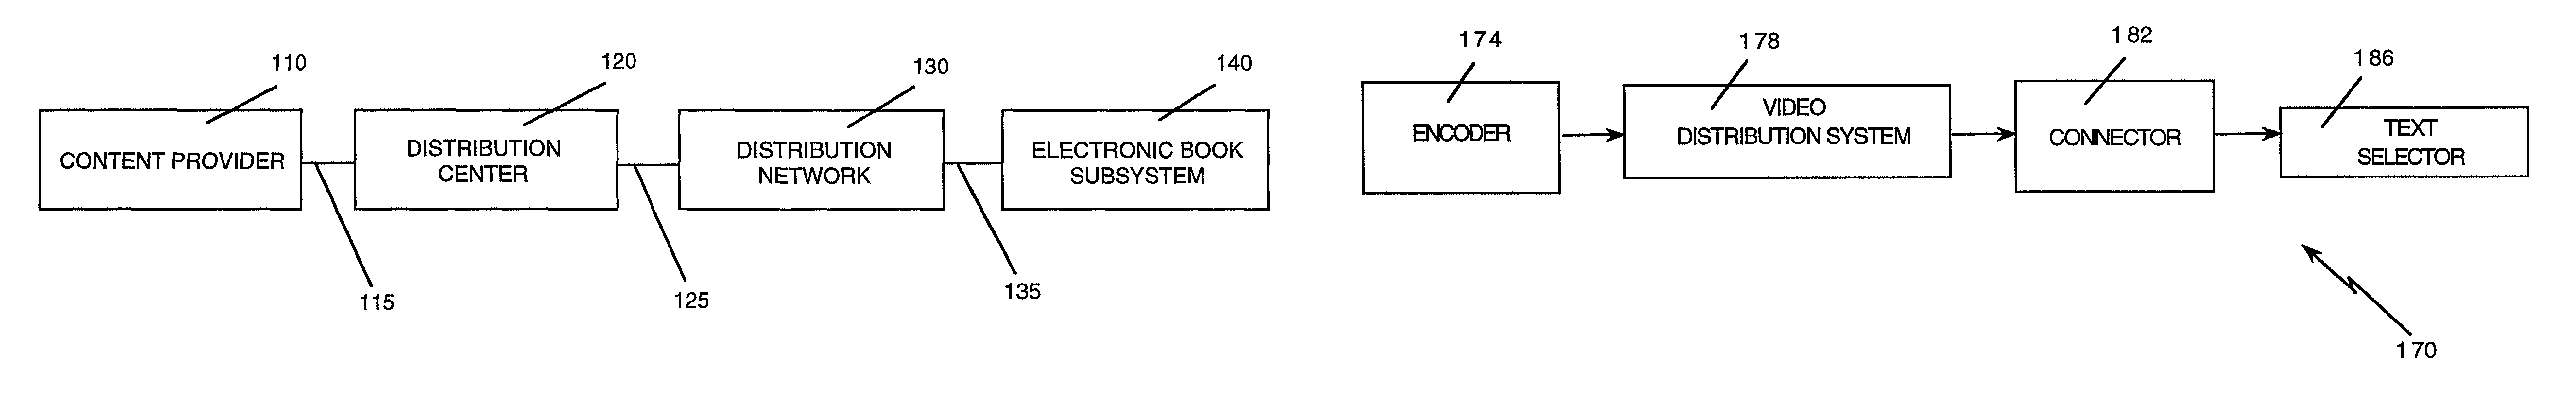 Electronic book alternative delivery systems